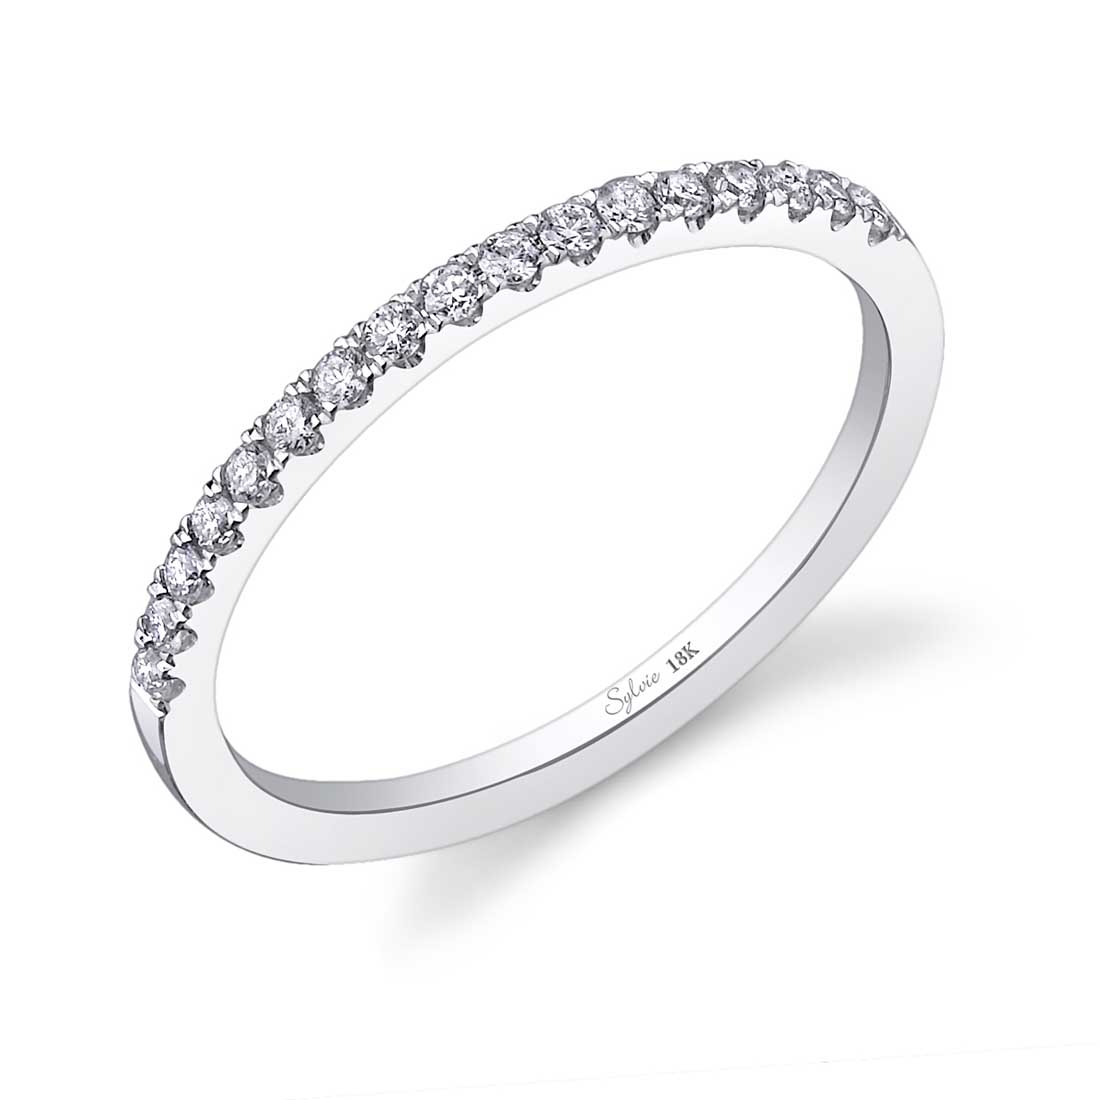 Profile Image of a Modern Princess Cut Engagement Ring with Halo